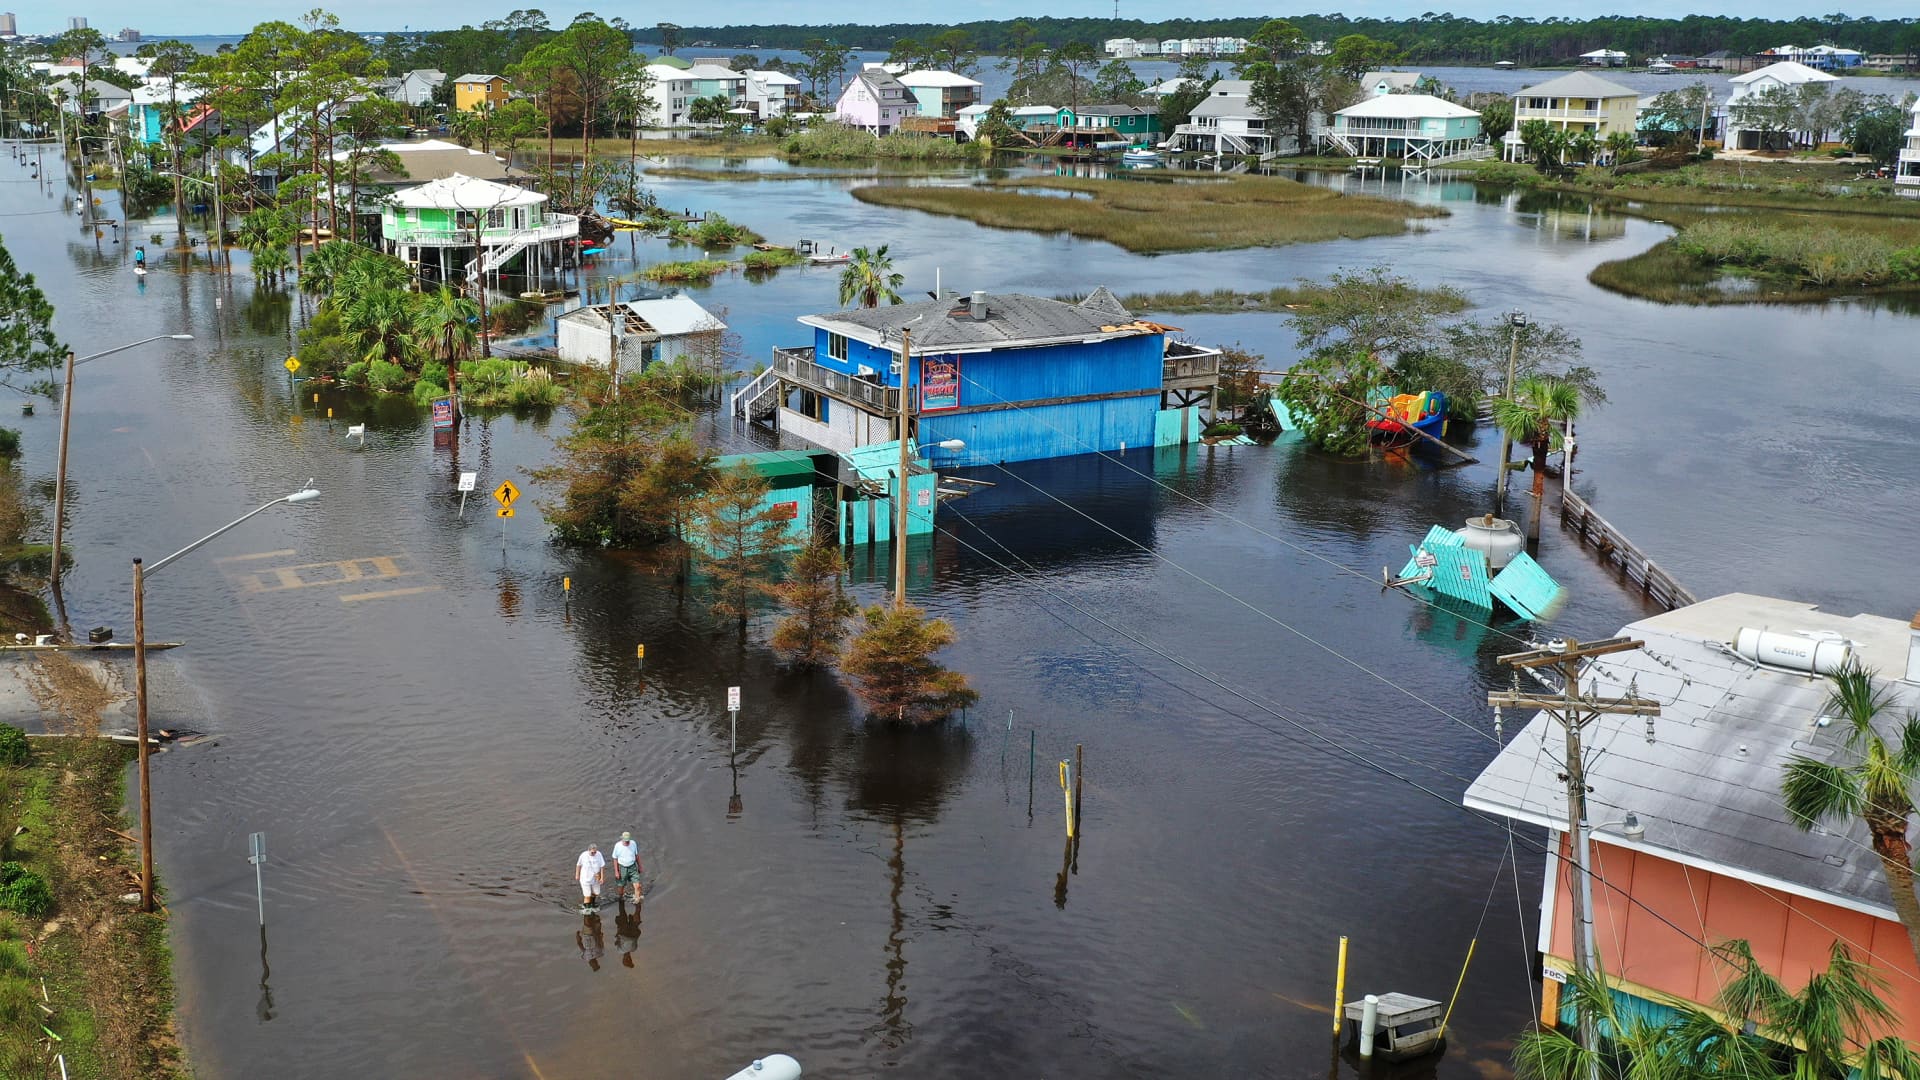 An aerial view from a drone shows people walking through a flooded street after Hurricane Sally passed through the area on September 17, 2020 in Gulf Shores, Alabama. The storm came ashore with heavy rain and high winds.